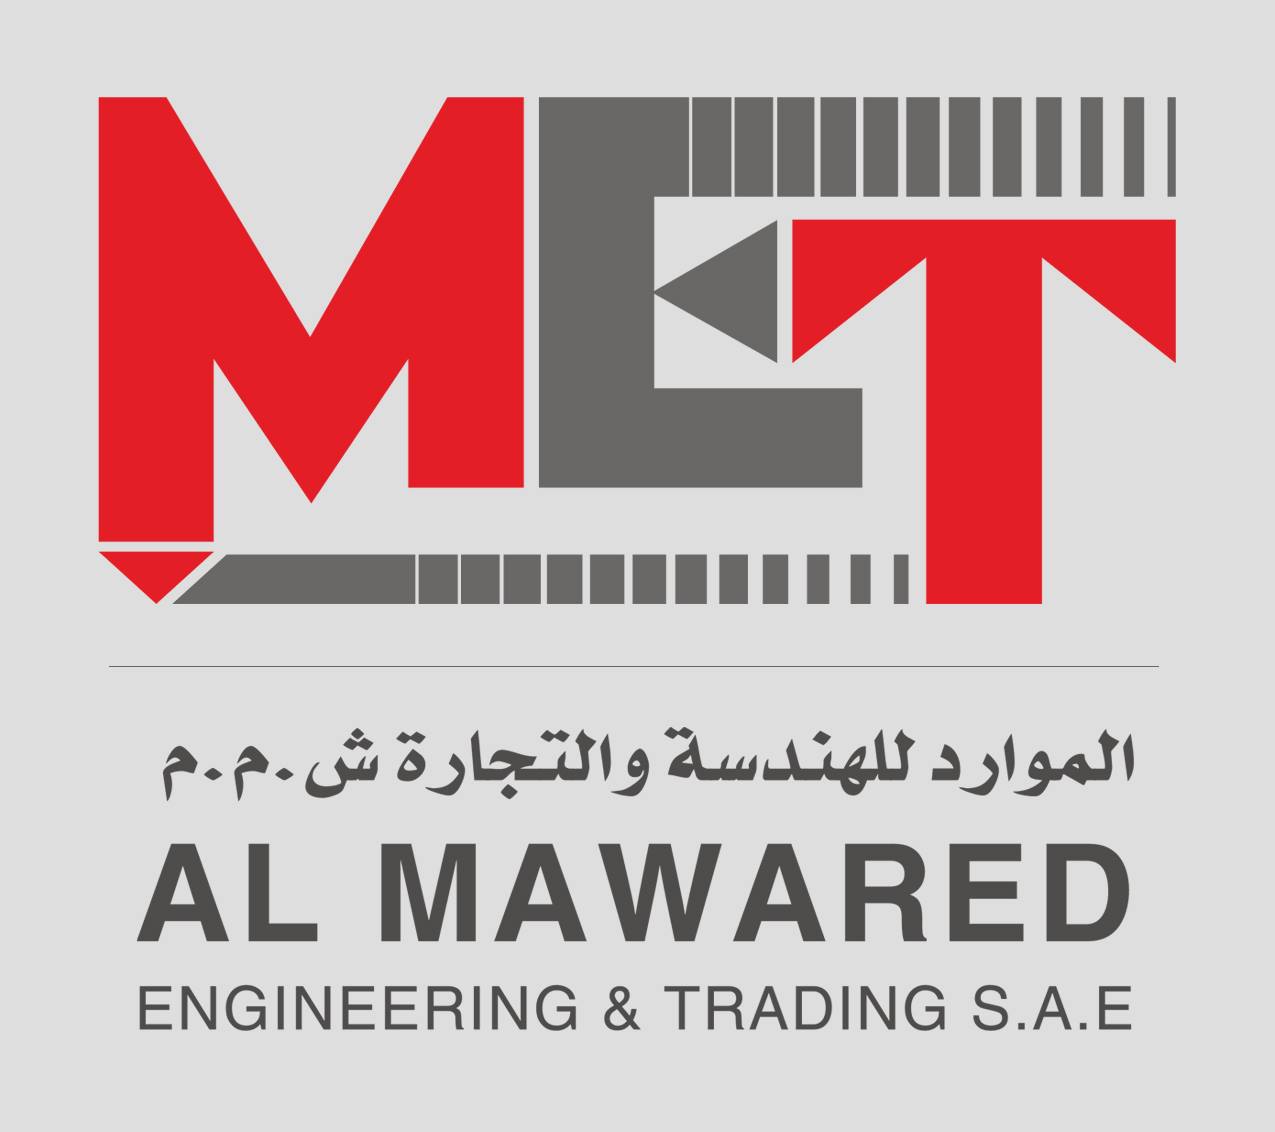 ALMAWARED ENGINEERING AND TRADING S.A.E (MET)